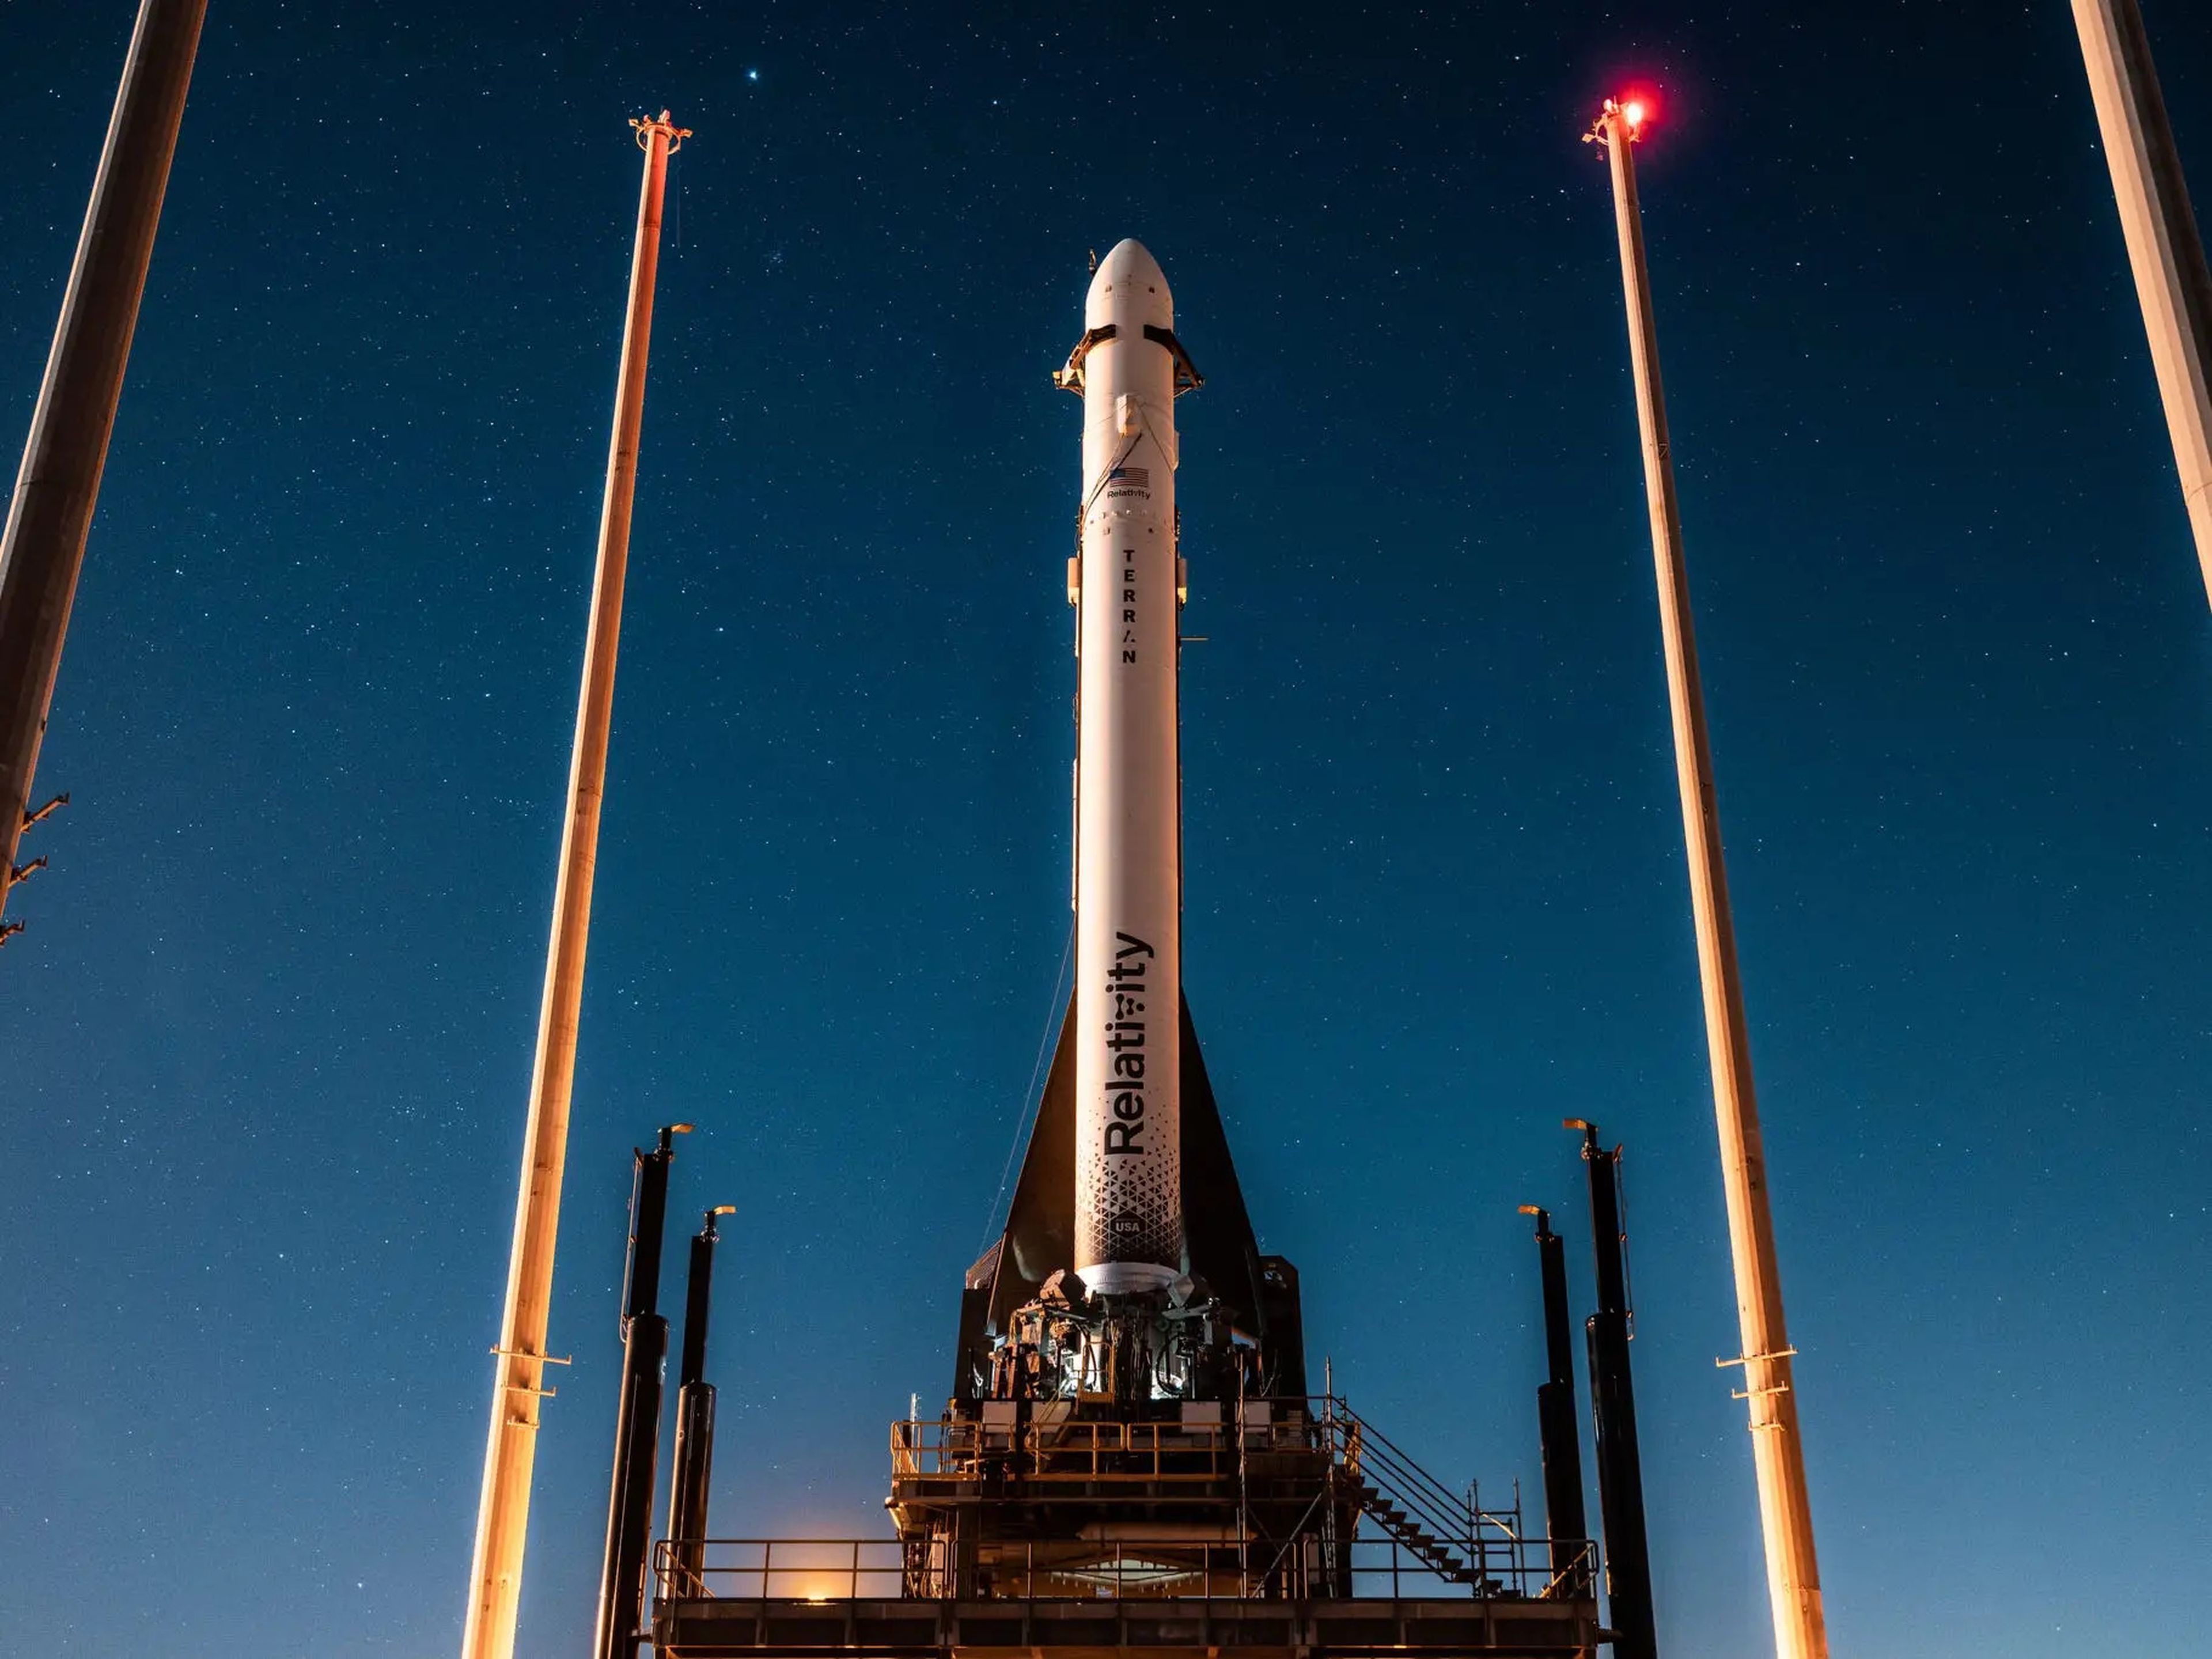 Terran 1 rocket is shown on the launchpad at night